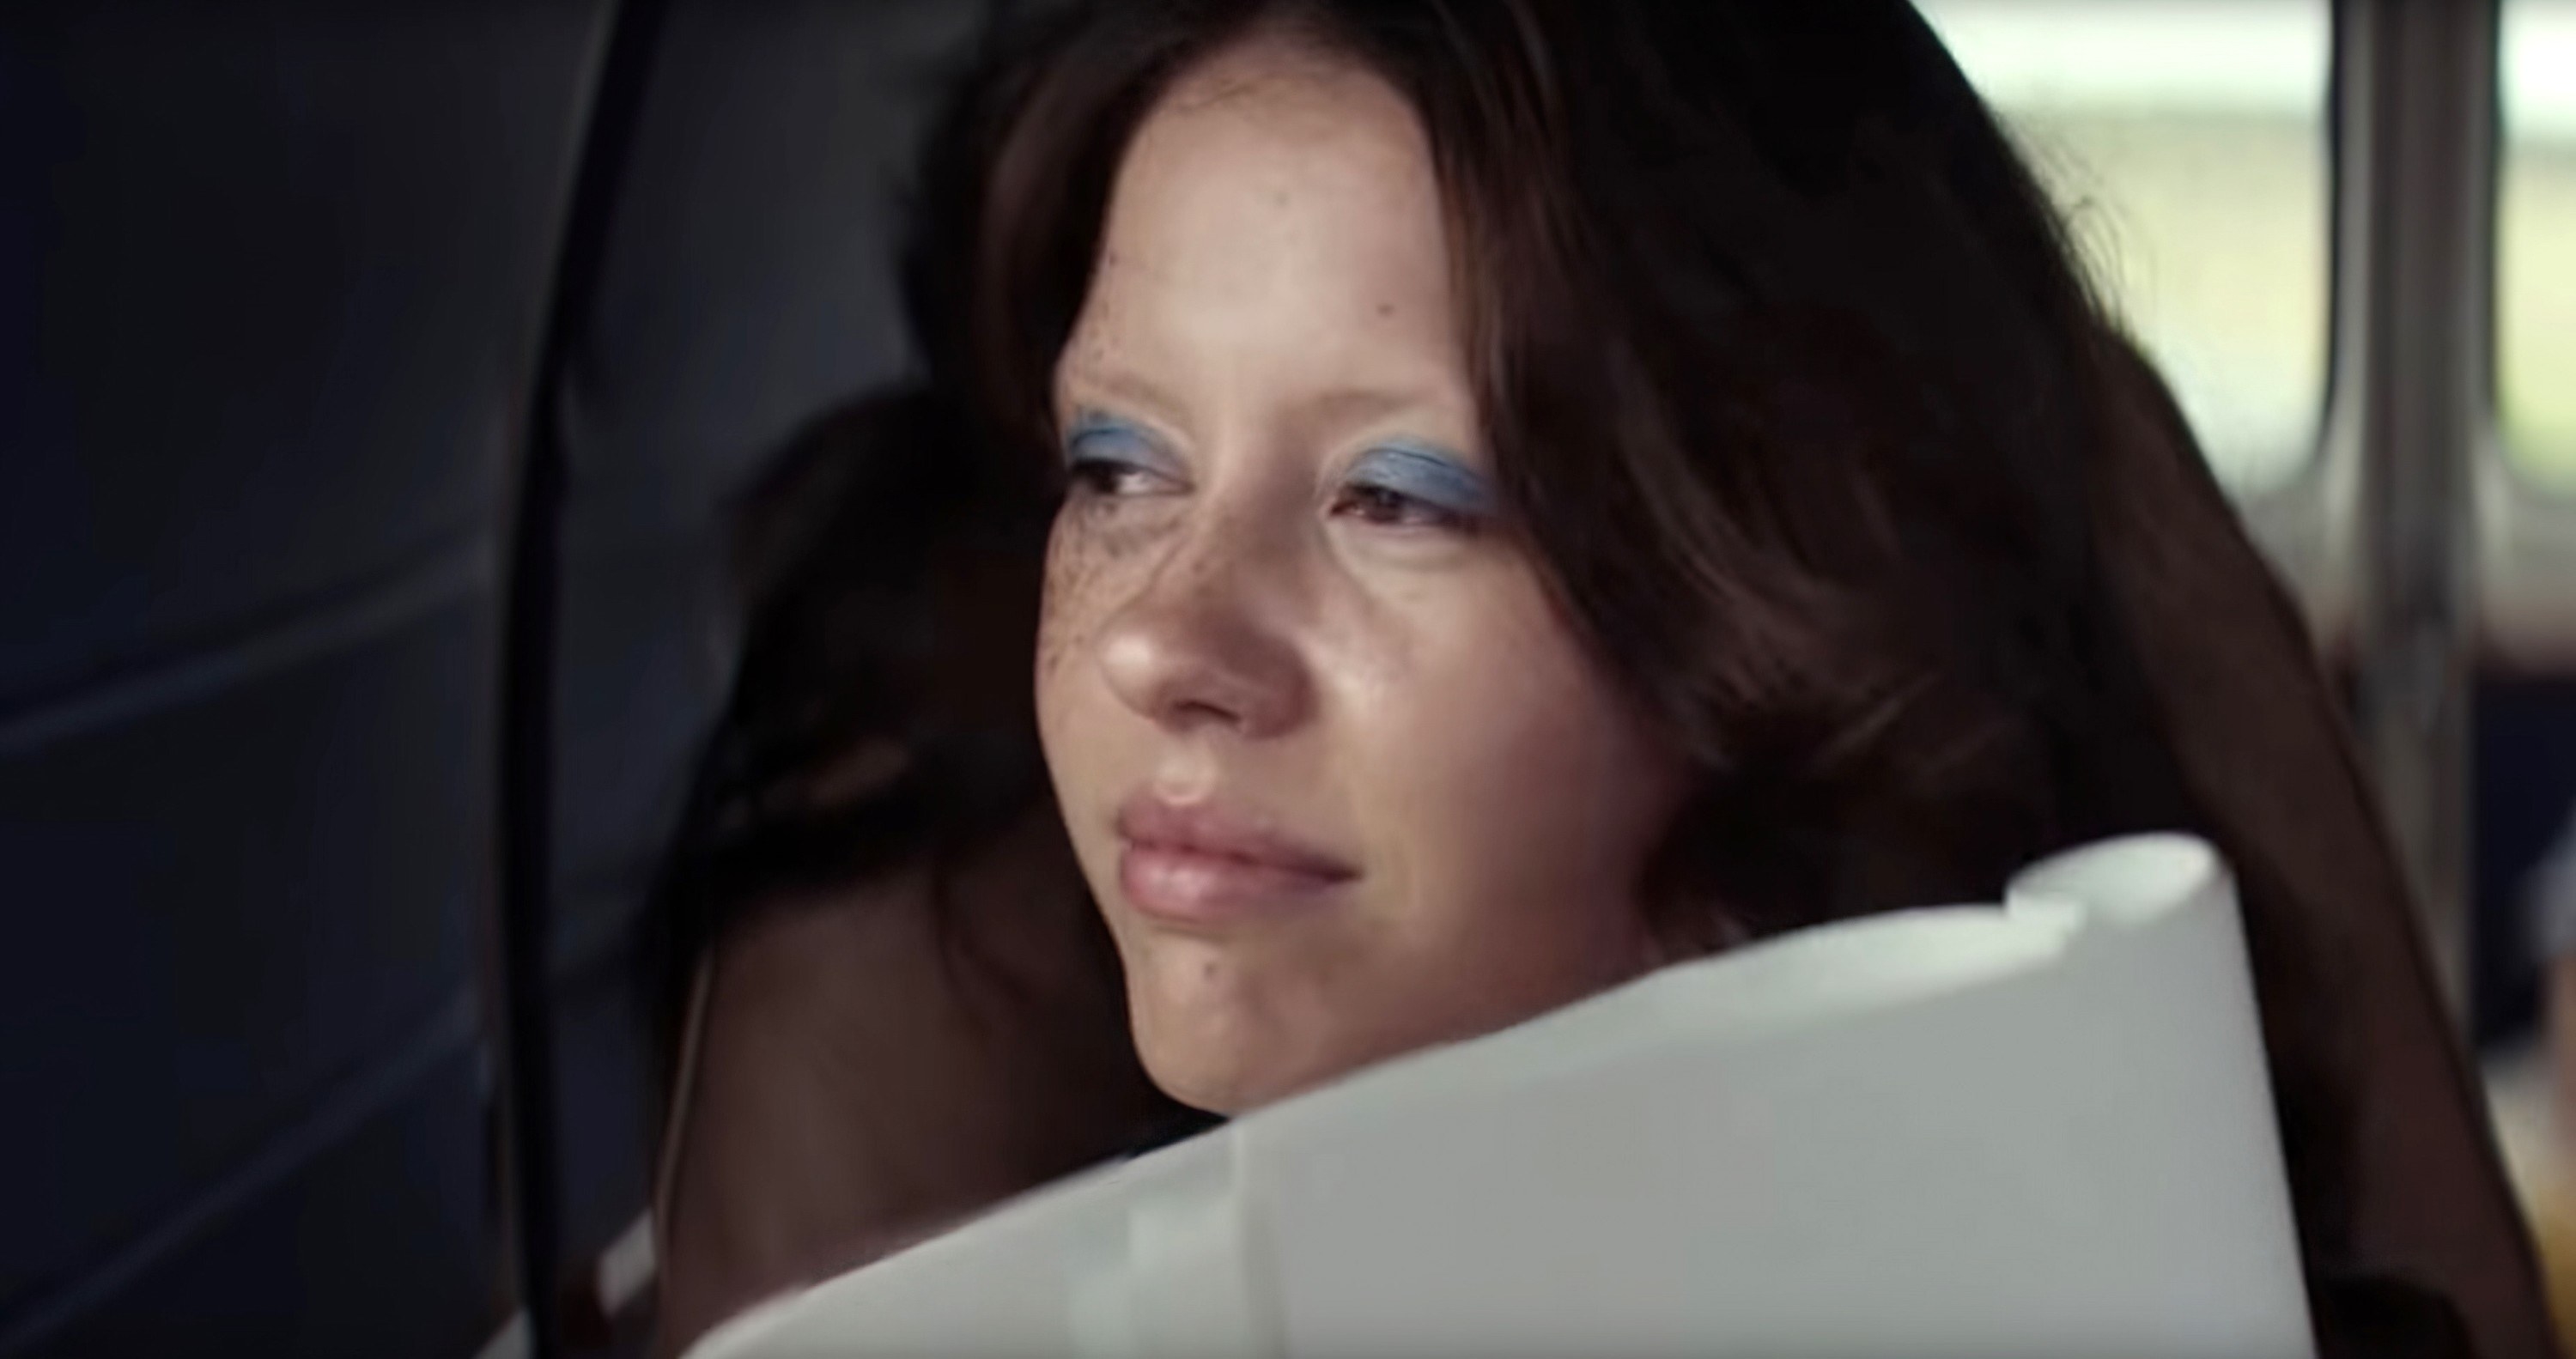 Mia Goth in her blue eyeshadow, reading a script, looking out the window as she rides in the passenger seat of a van